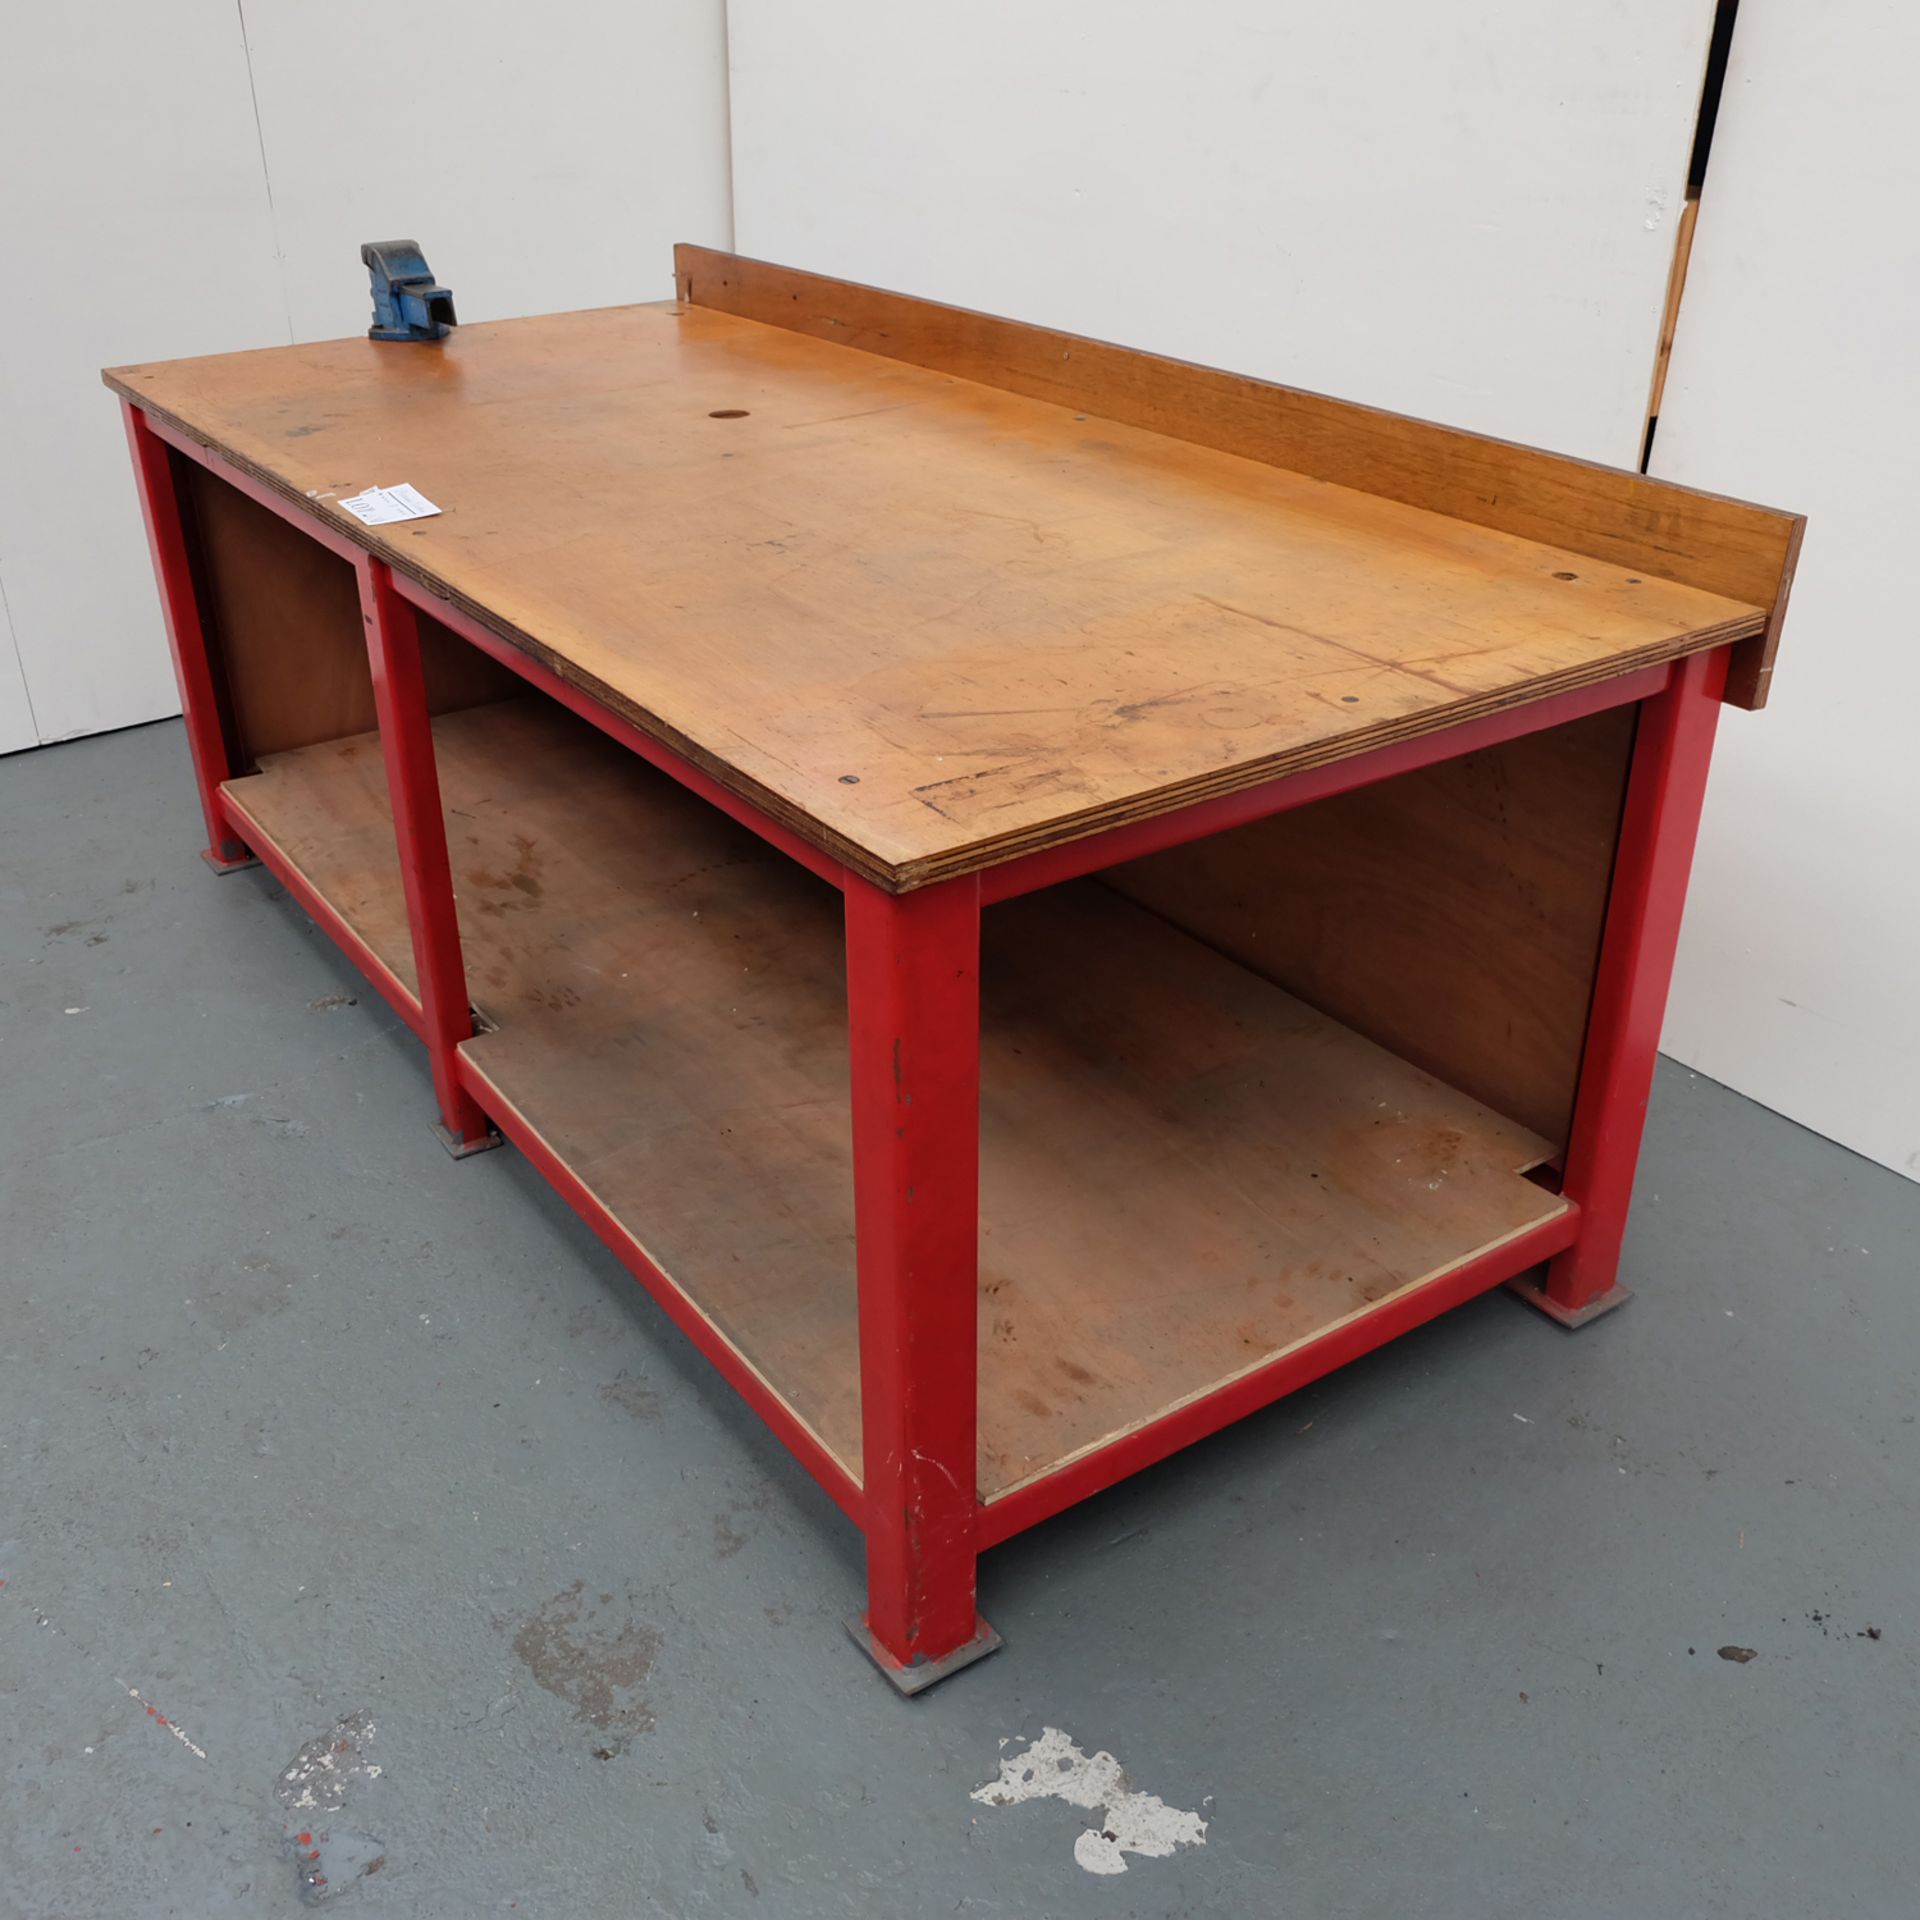 Heavy Duty Table with a 3 1/2" Bench Vice. Approx Dimensions 2300mm x 1020mm x 850mm Working Height - Image 2 of 4